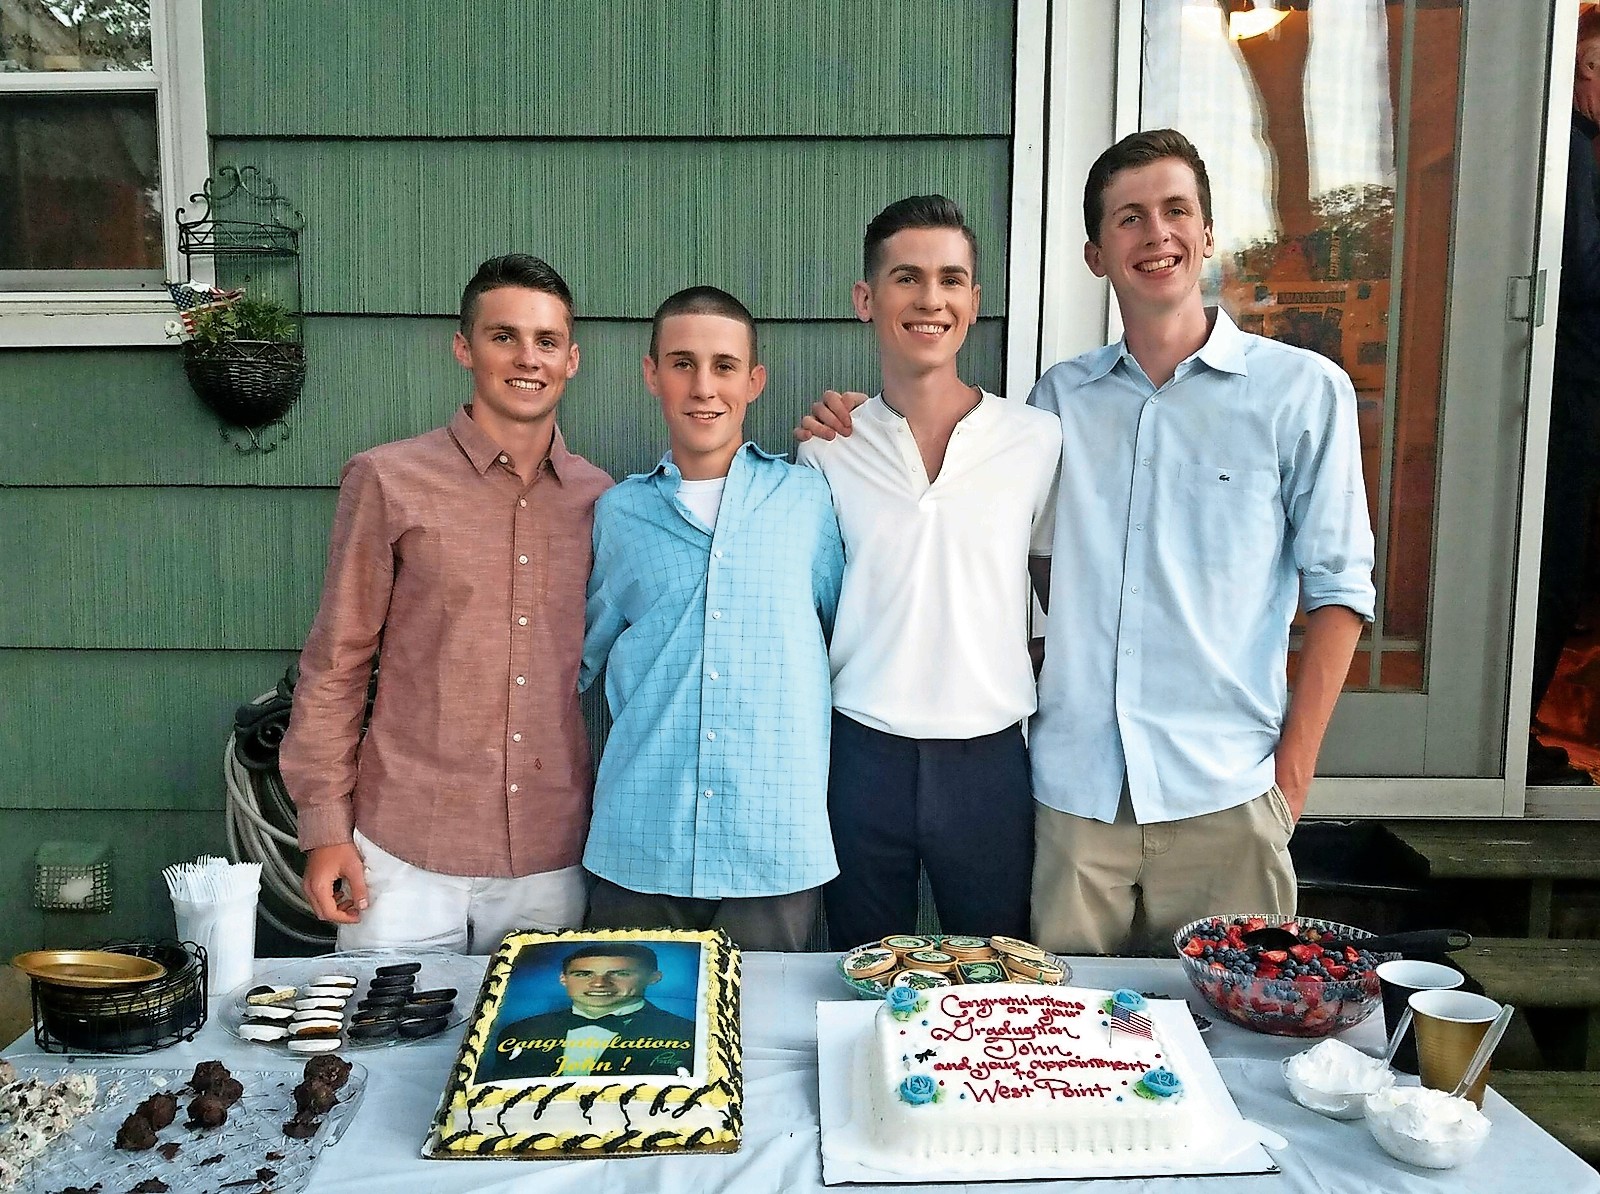 Future West Point cadet John Burke, far left, was joined by his brothers Mikey, Matt and Tom at his going-away party last weekend.